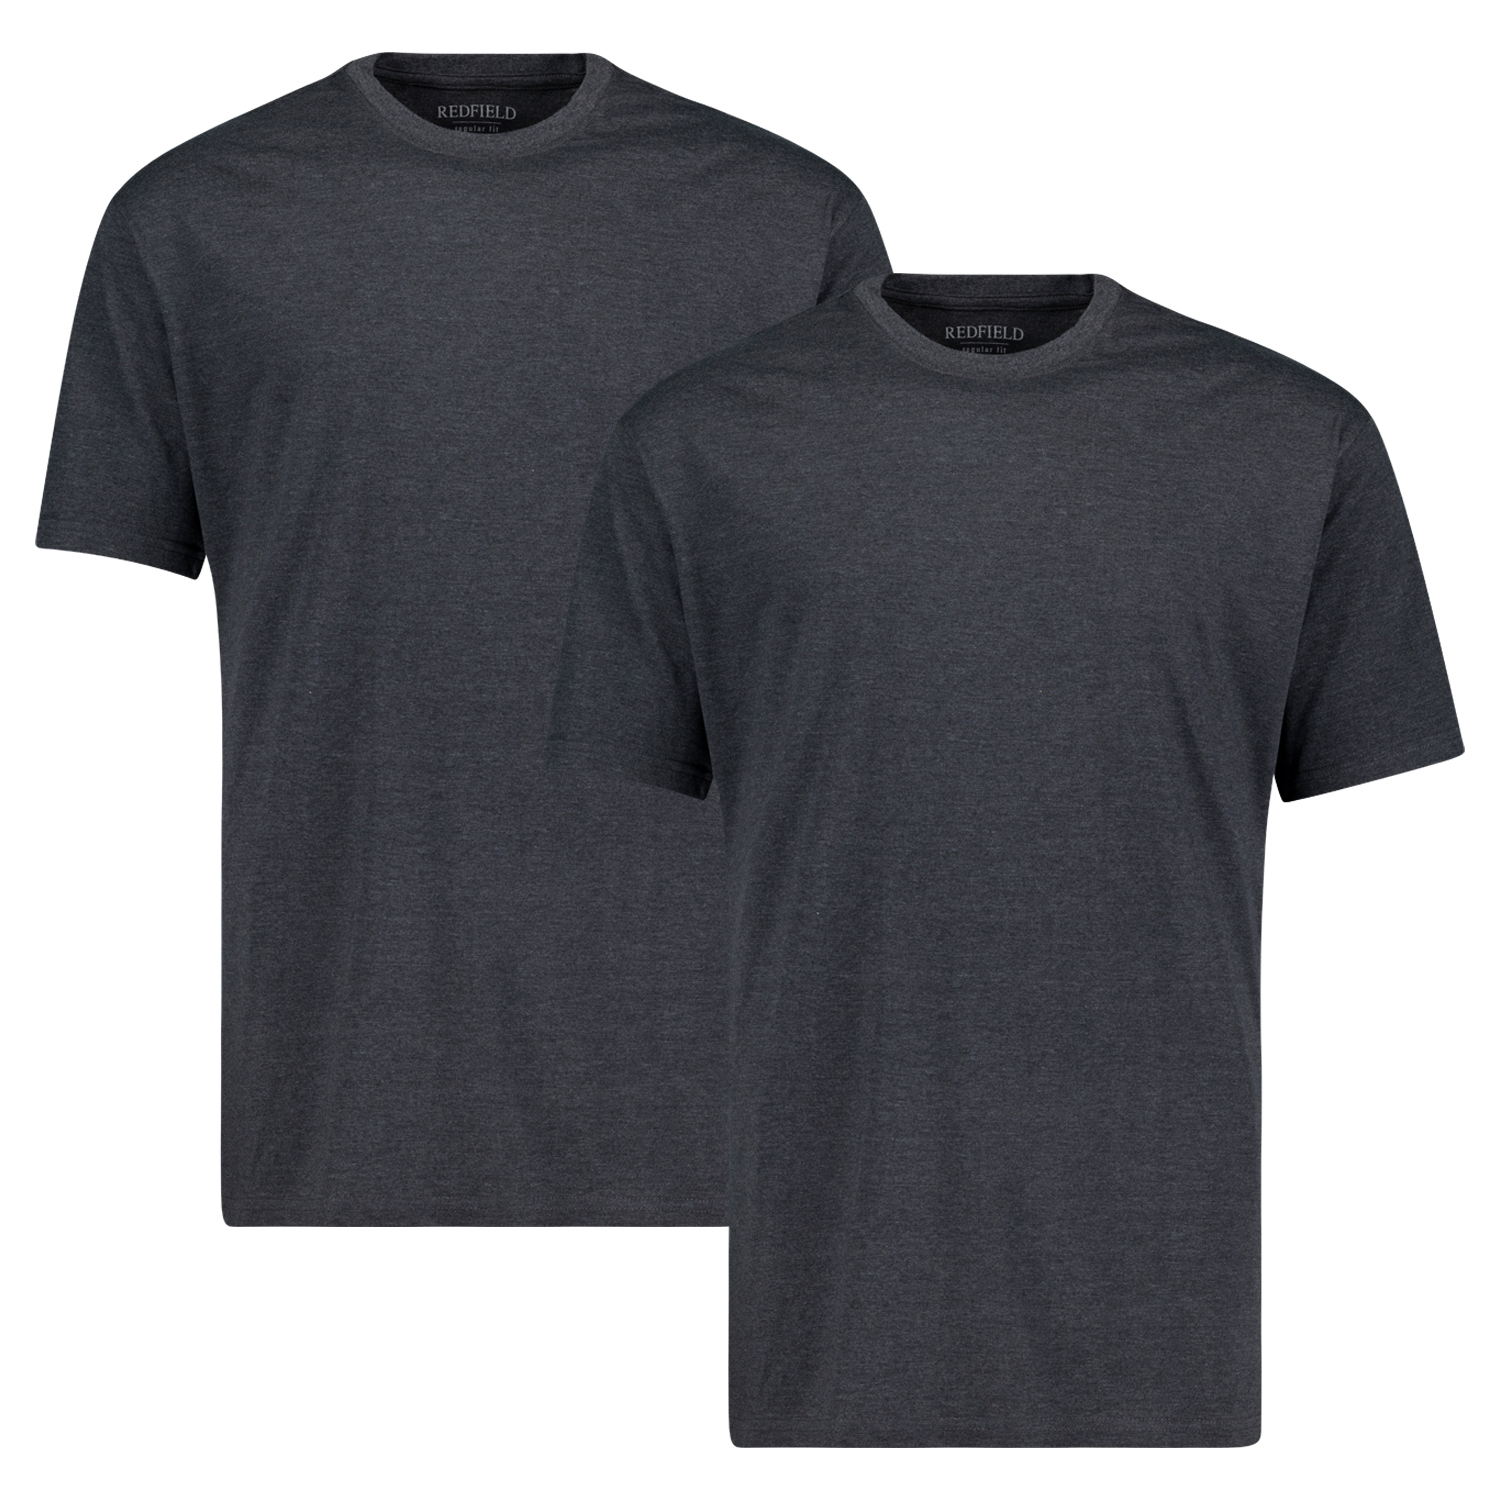 Dark grey crew neck t-shirt in twin packs by Redfield in plus sizes up to 10XL